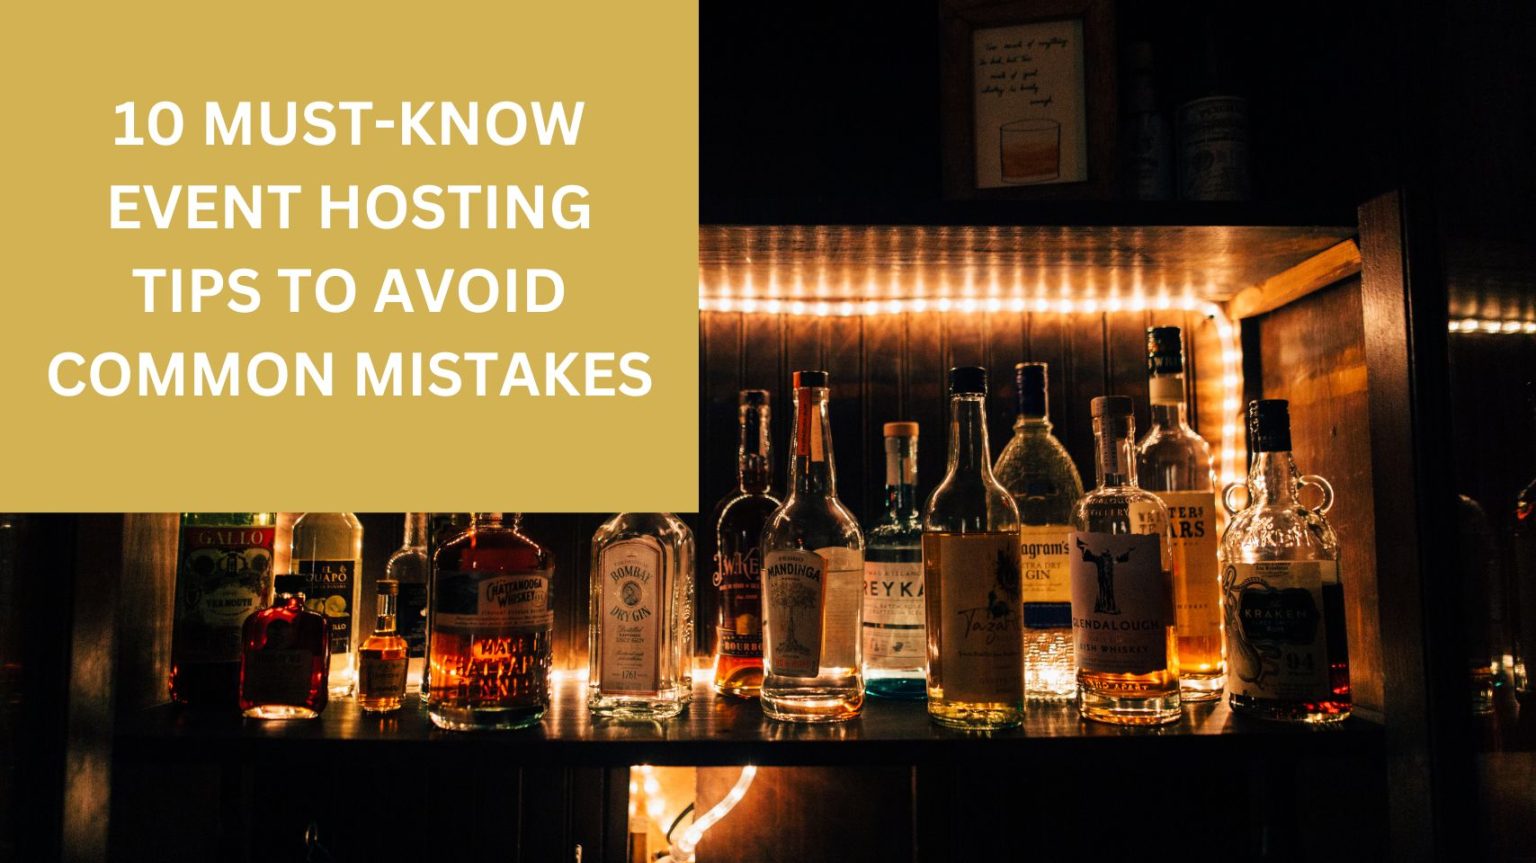 10 Must-Know Event Hosting Tips to Avoid Common Mistakes